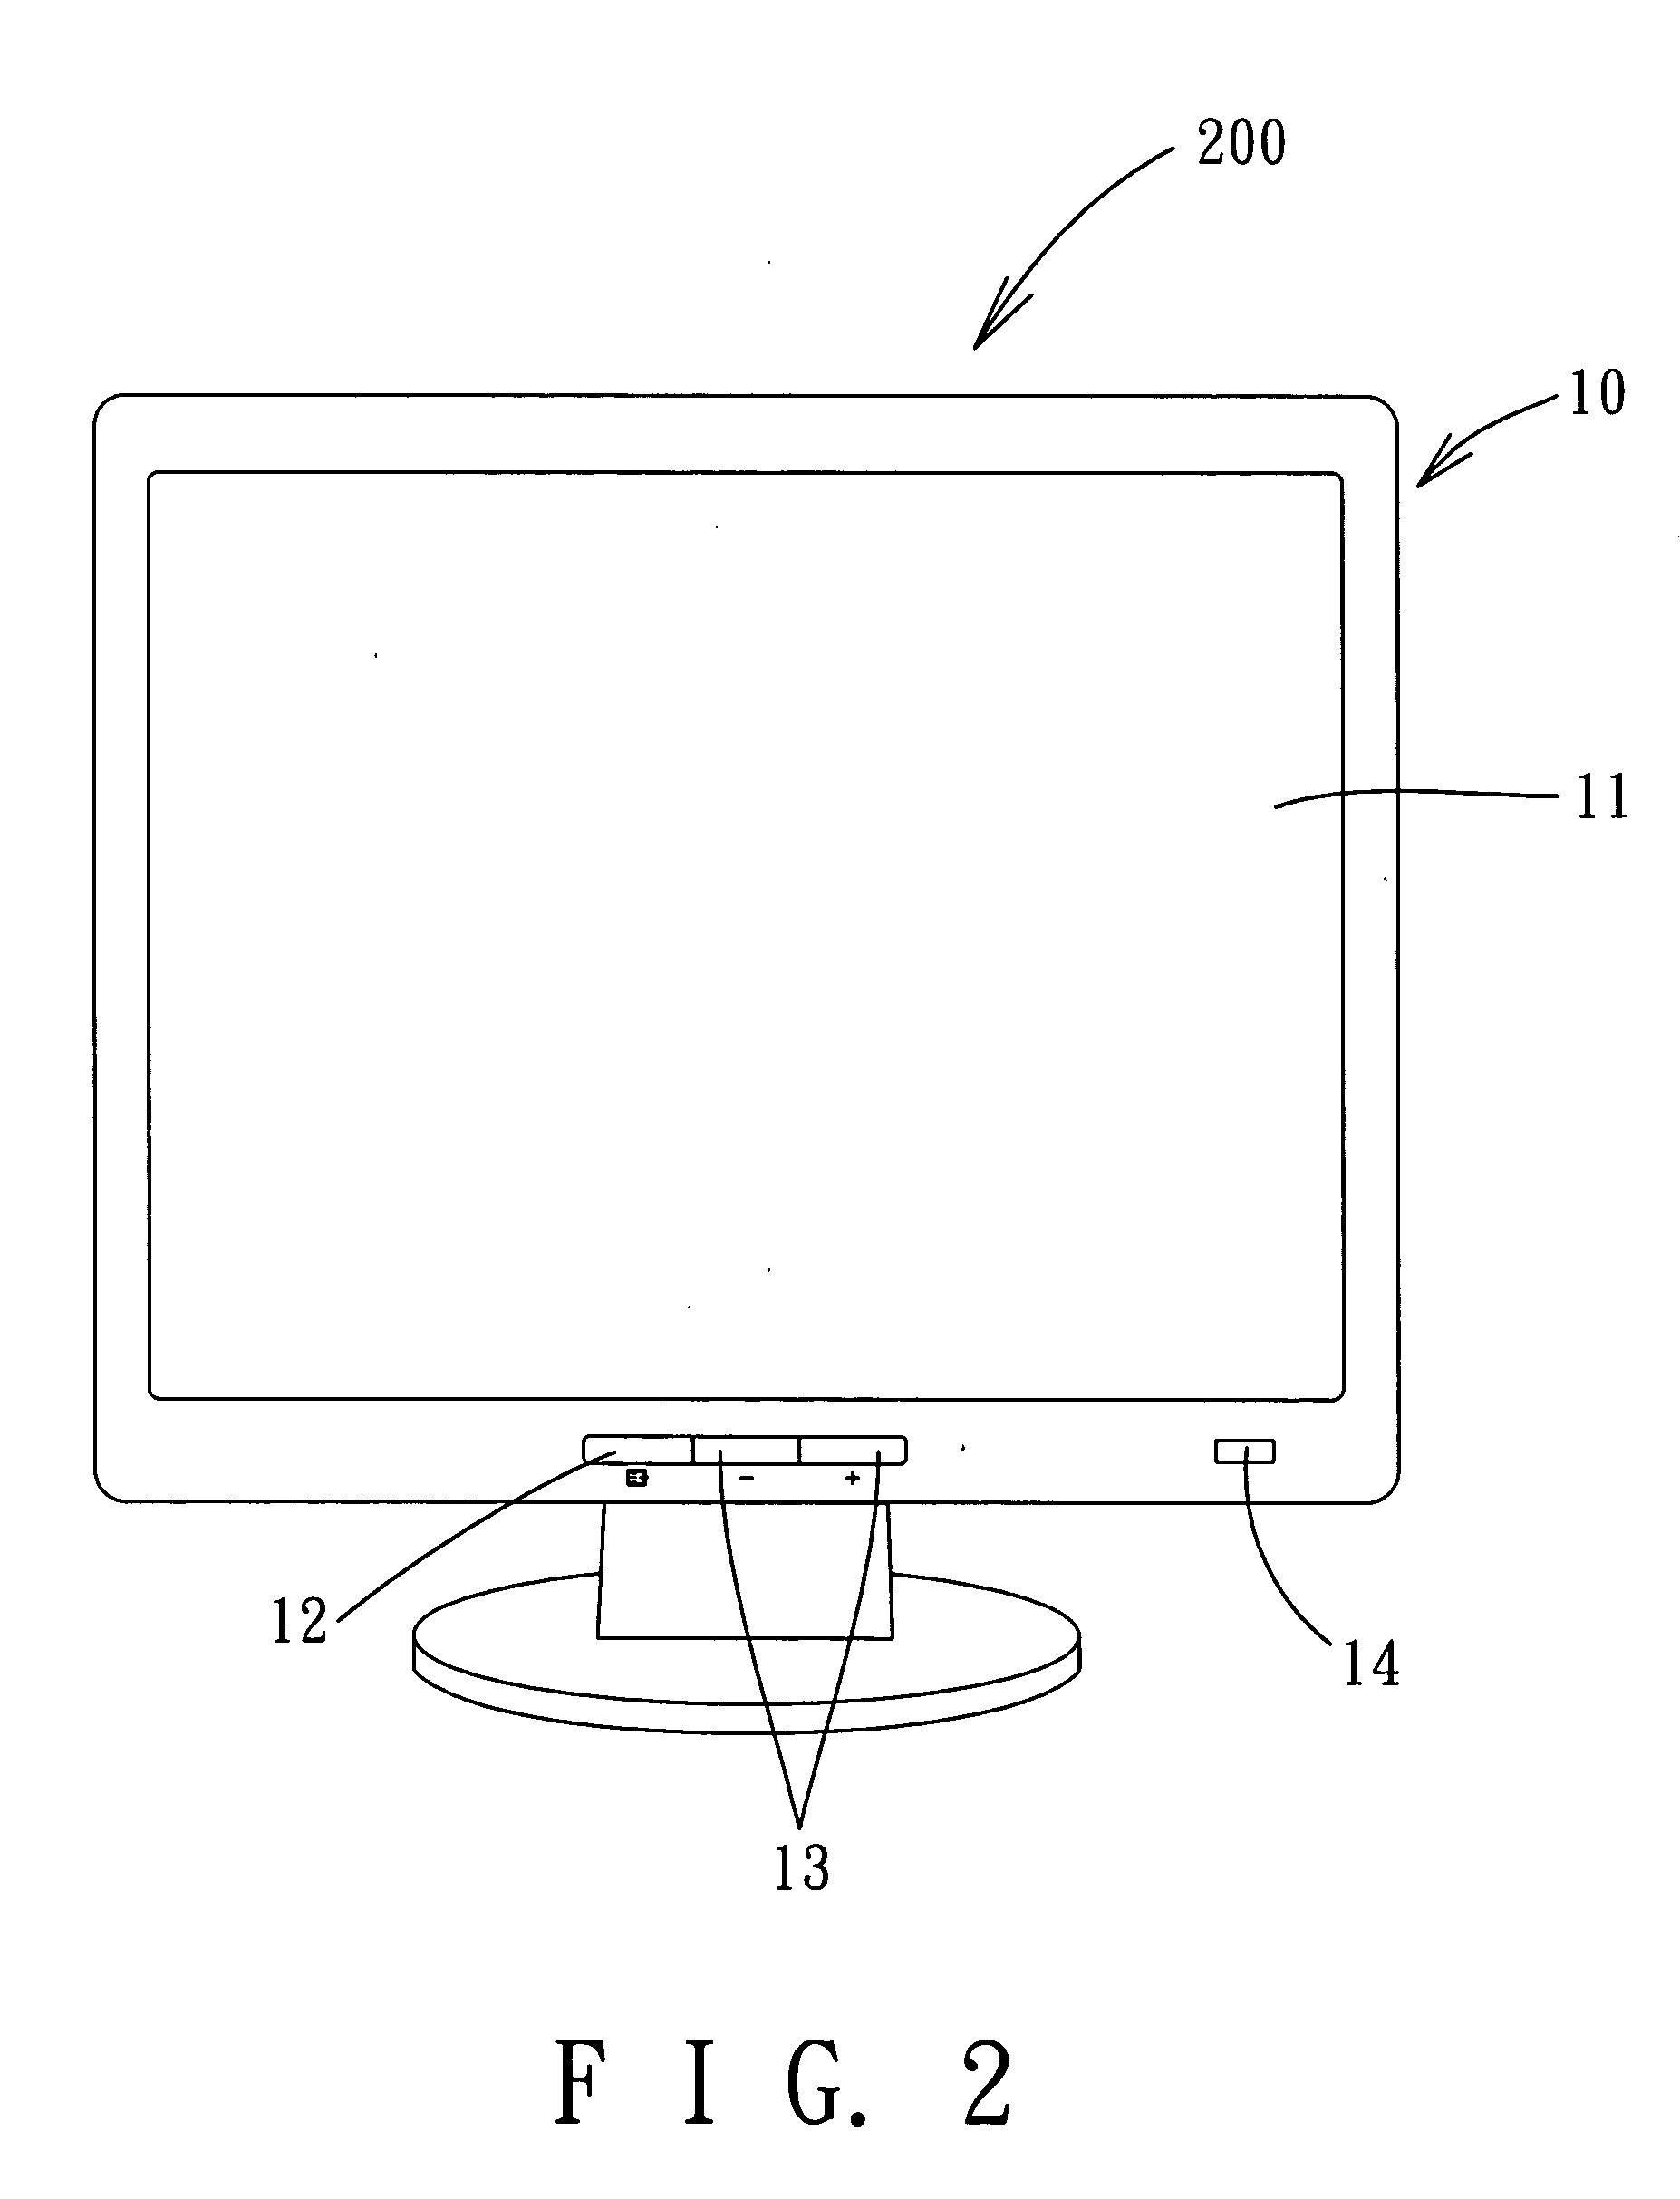 Display device and method of automatically powering on and powering off the same